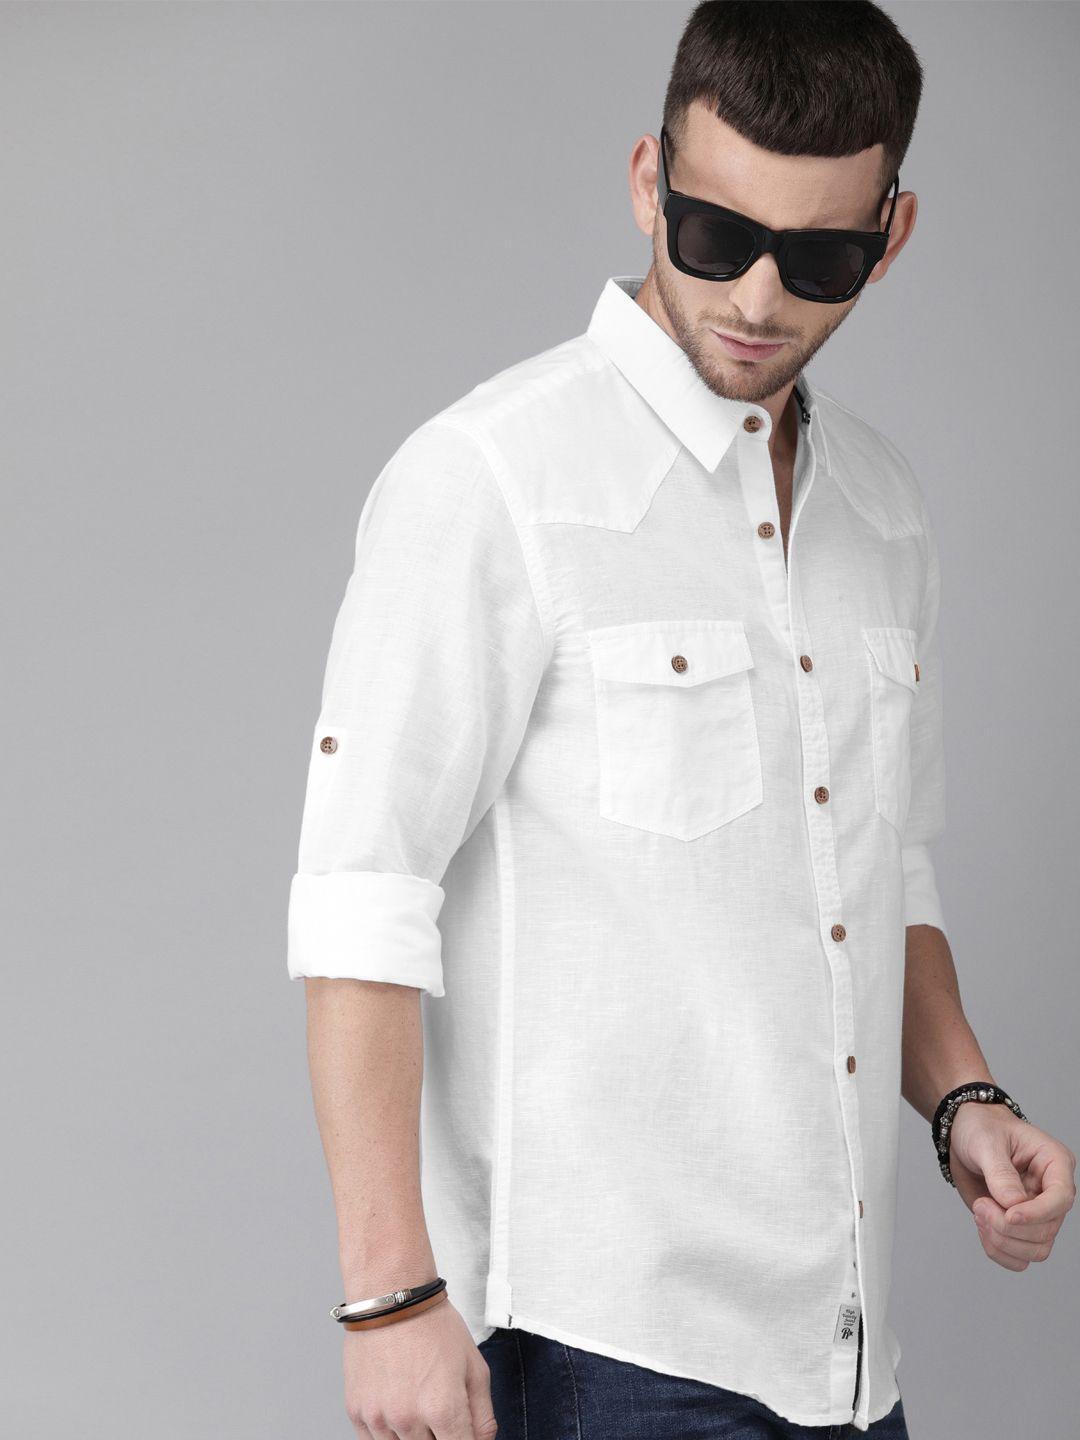 roadster-men-white-casual-linen-sustainable-shirt